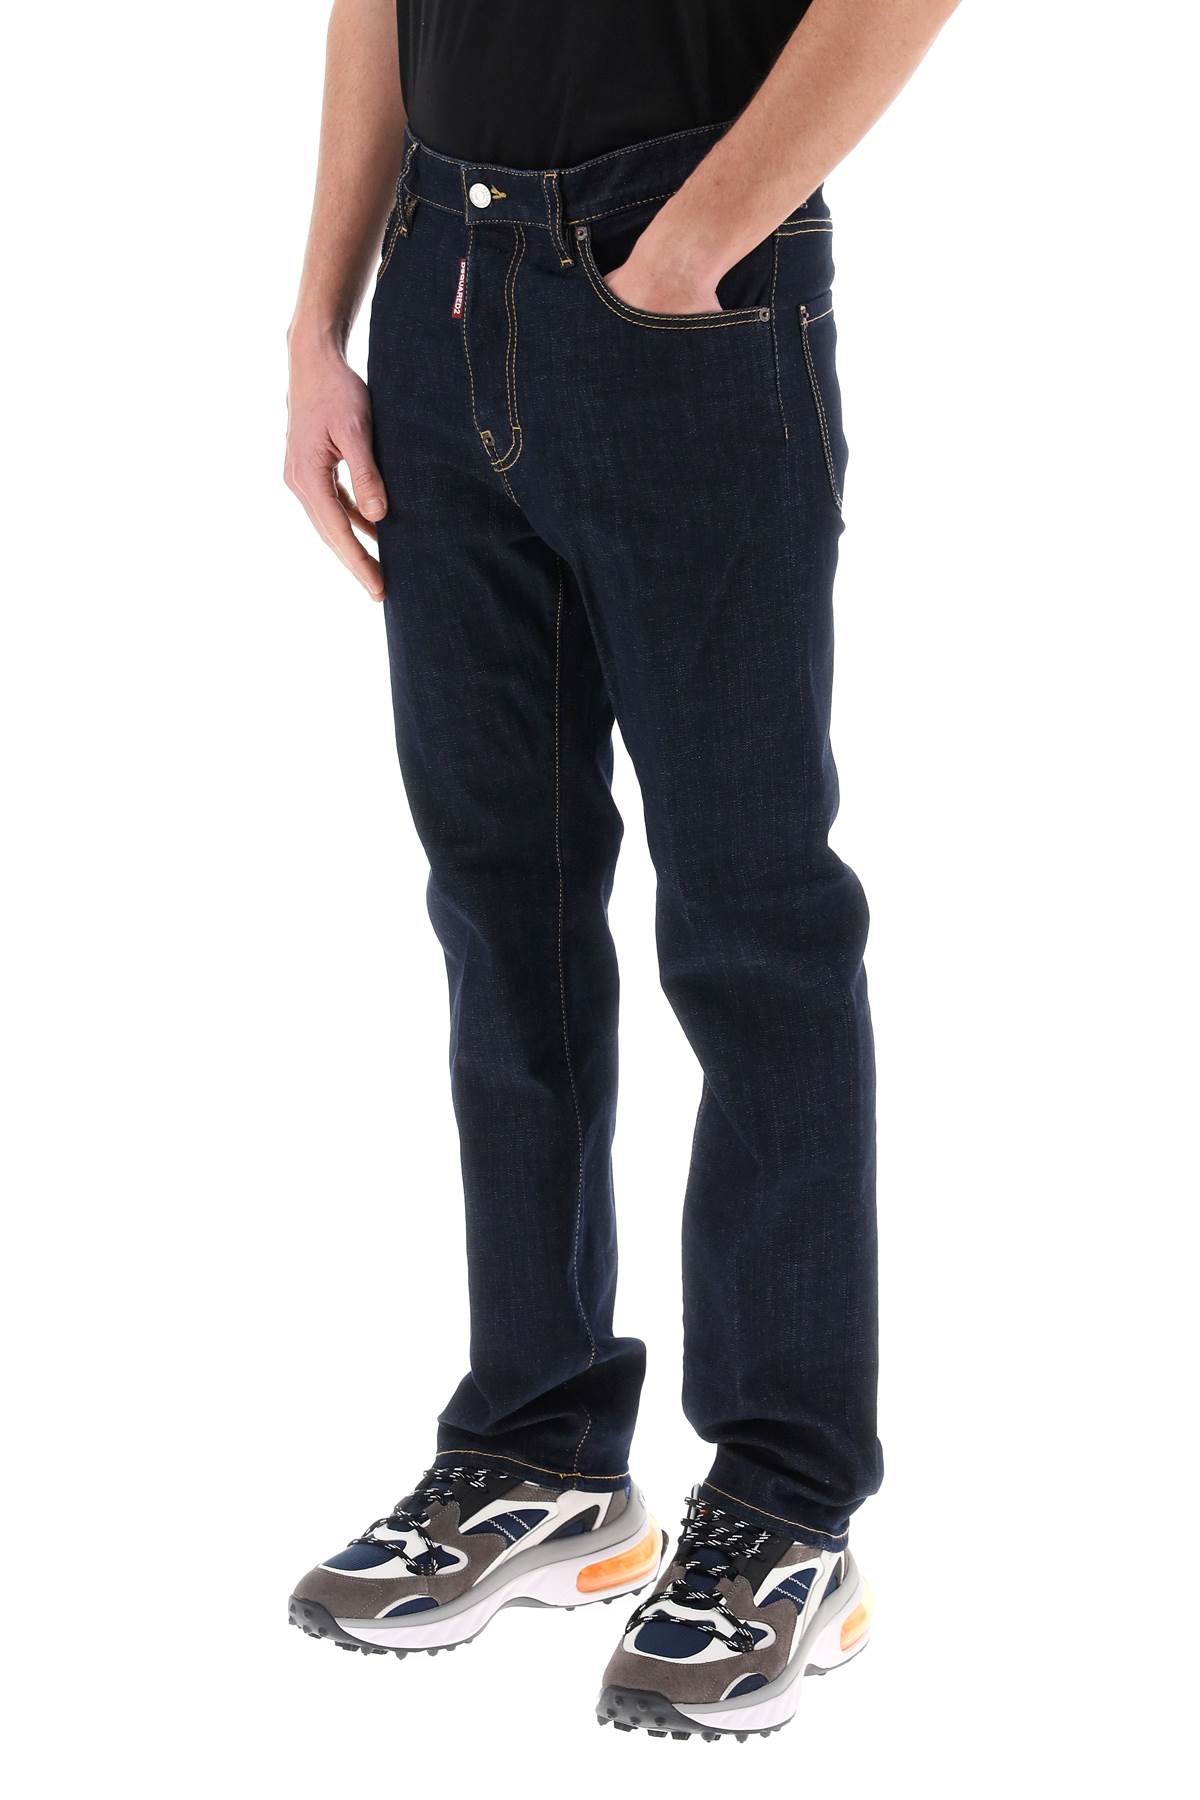 Dsquared2 642 jeans in dark rinse wash-3